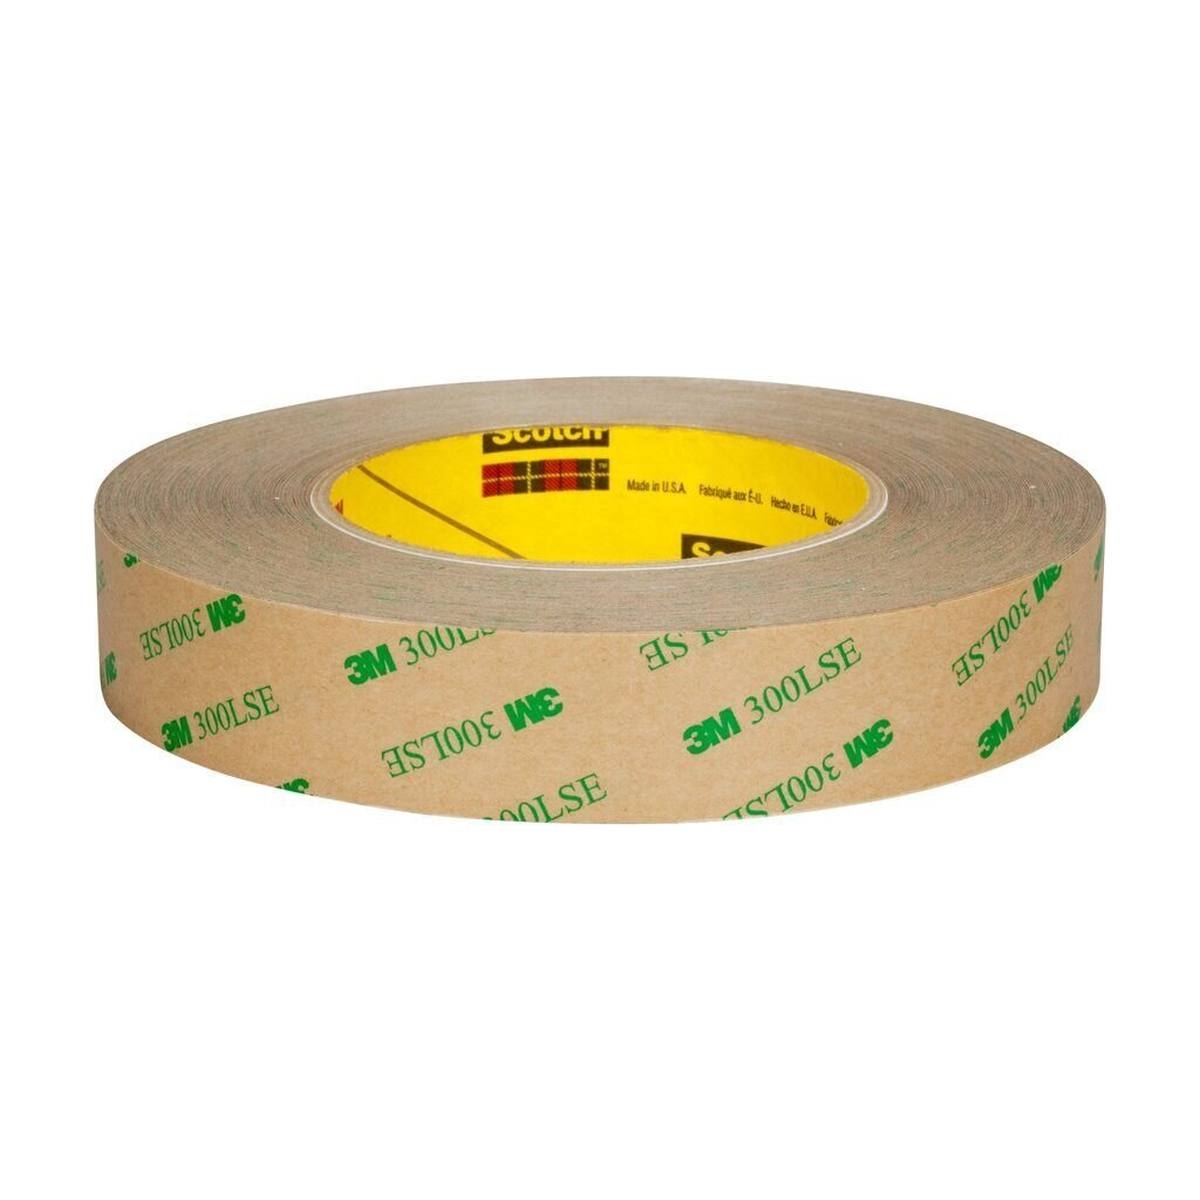 3M Double-sided adhesive tape with polyester backing 93020LE, transparent, 50 mm x 55 m, 0.20 mm